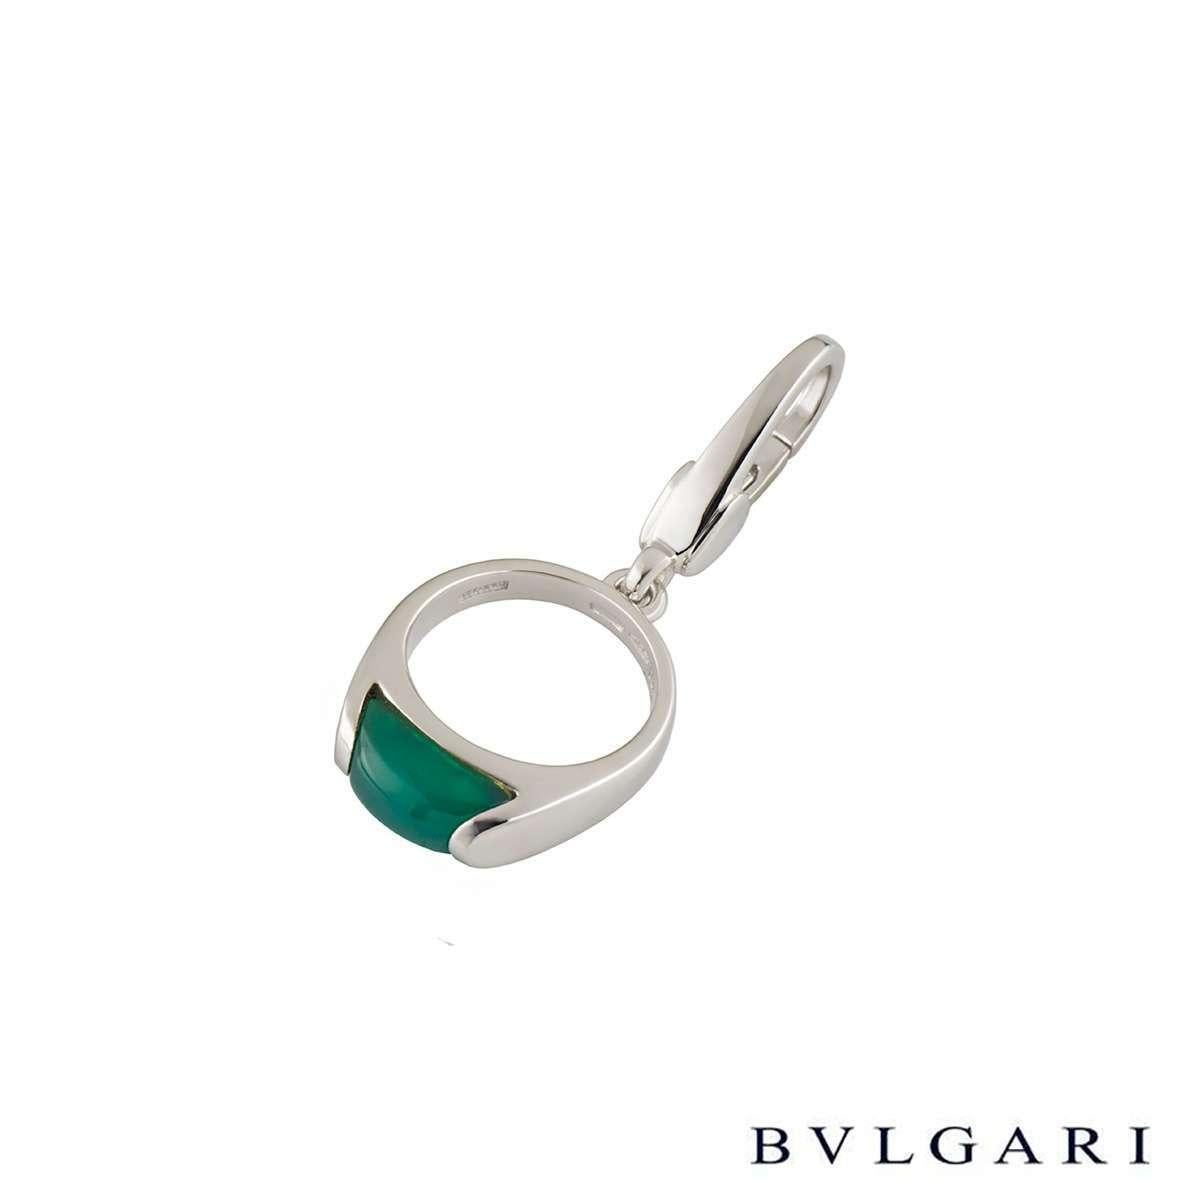 An elegant 18k white gold Bvlgari charm pendant. The pendant comprises of a ring motif with a jade inlay in a tension setting. The pendant measures 3cm in length (including the bale) and 1.2cm in width, with a gross weight of 2.90 grams.

The